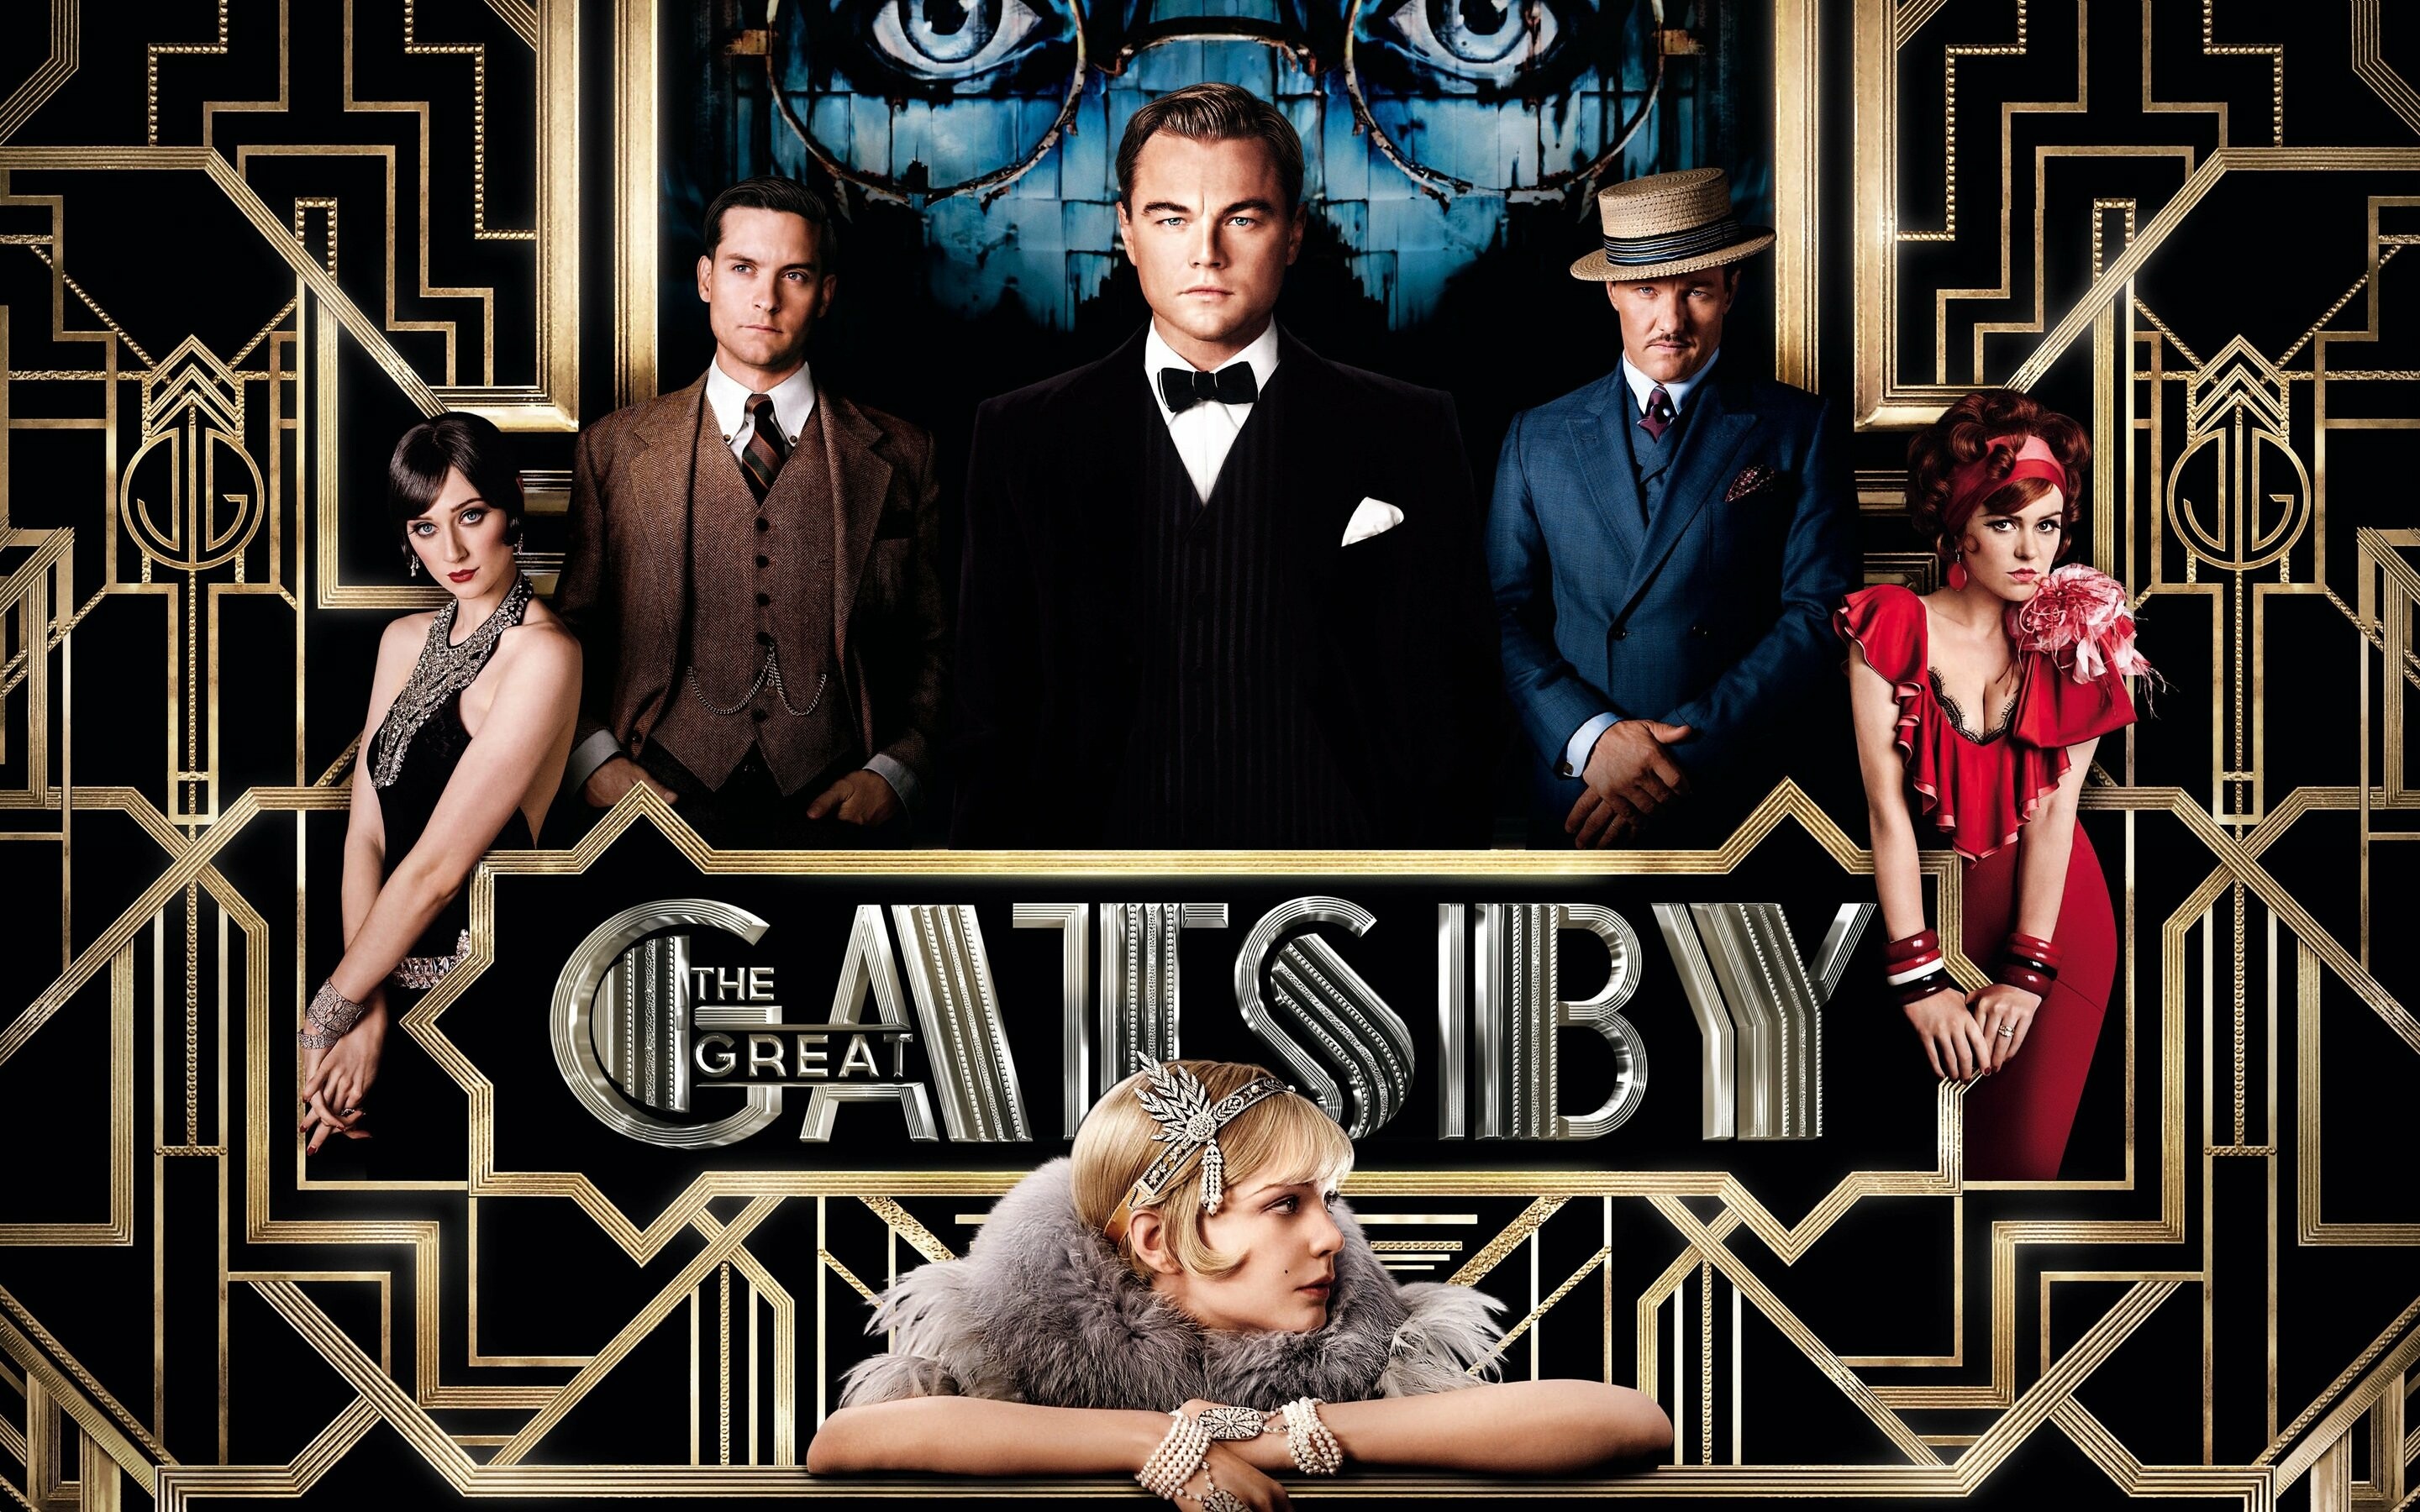 The Great Gatsby: Nick, a would-be writer, moves in next-door to millionaire, Leonardo DiCaprio, Movie plot. 2880x1800 HD Background.